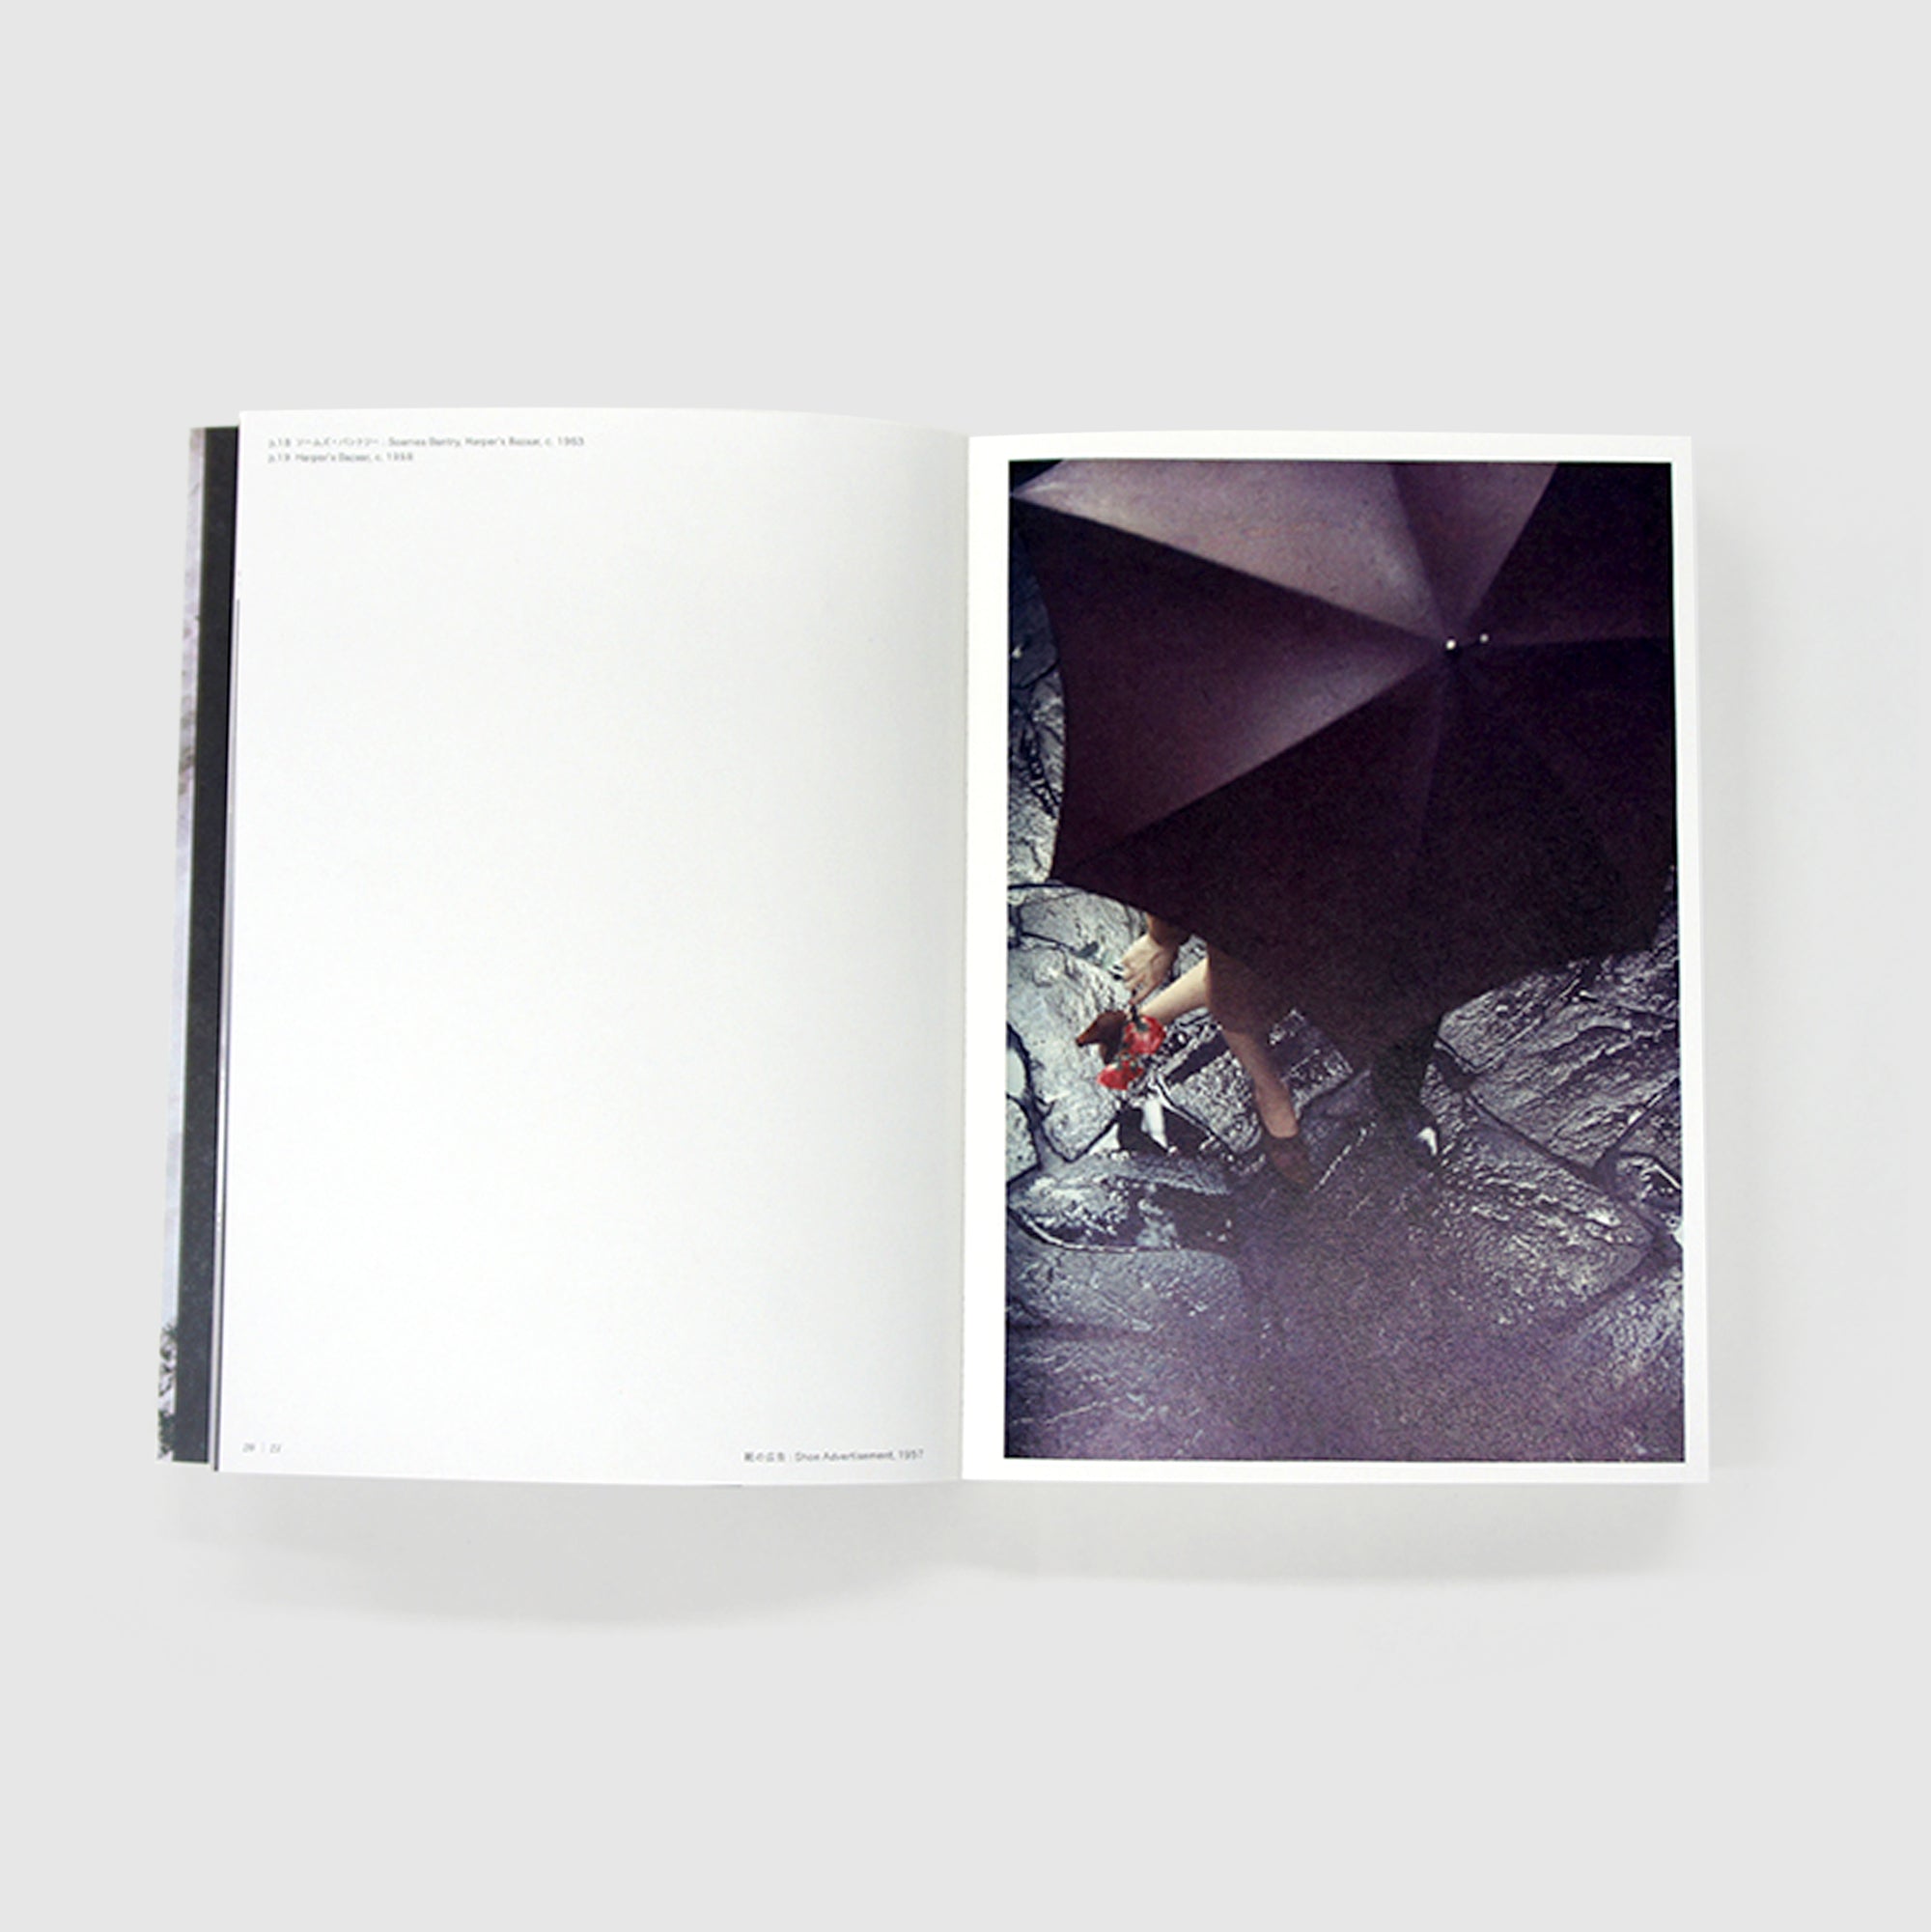 All About Saul Leiter, 45% OFF